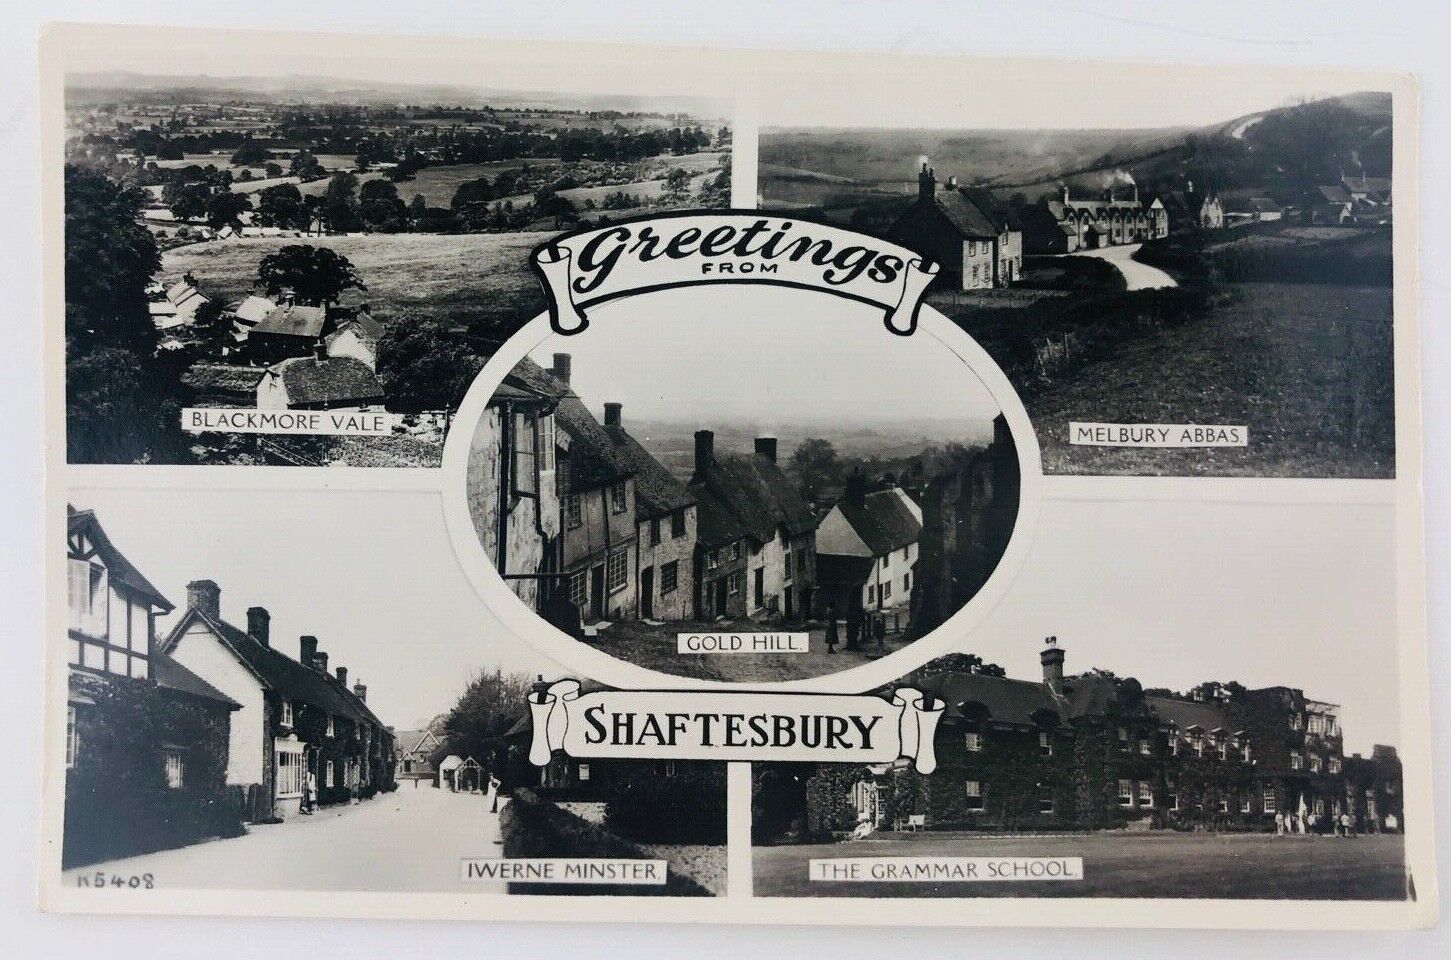 Vintage Shaftsbury England Greetings from Shaftsbury RPPC Famous Sights 